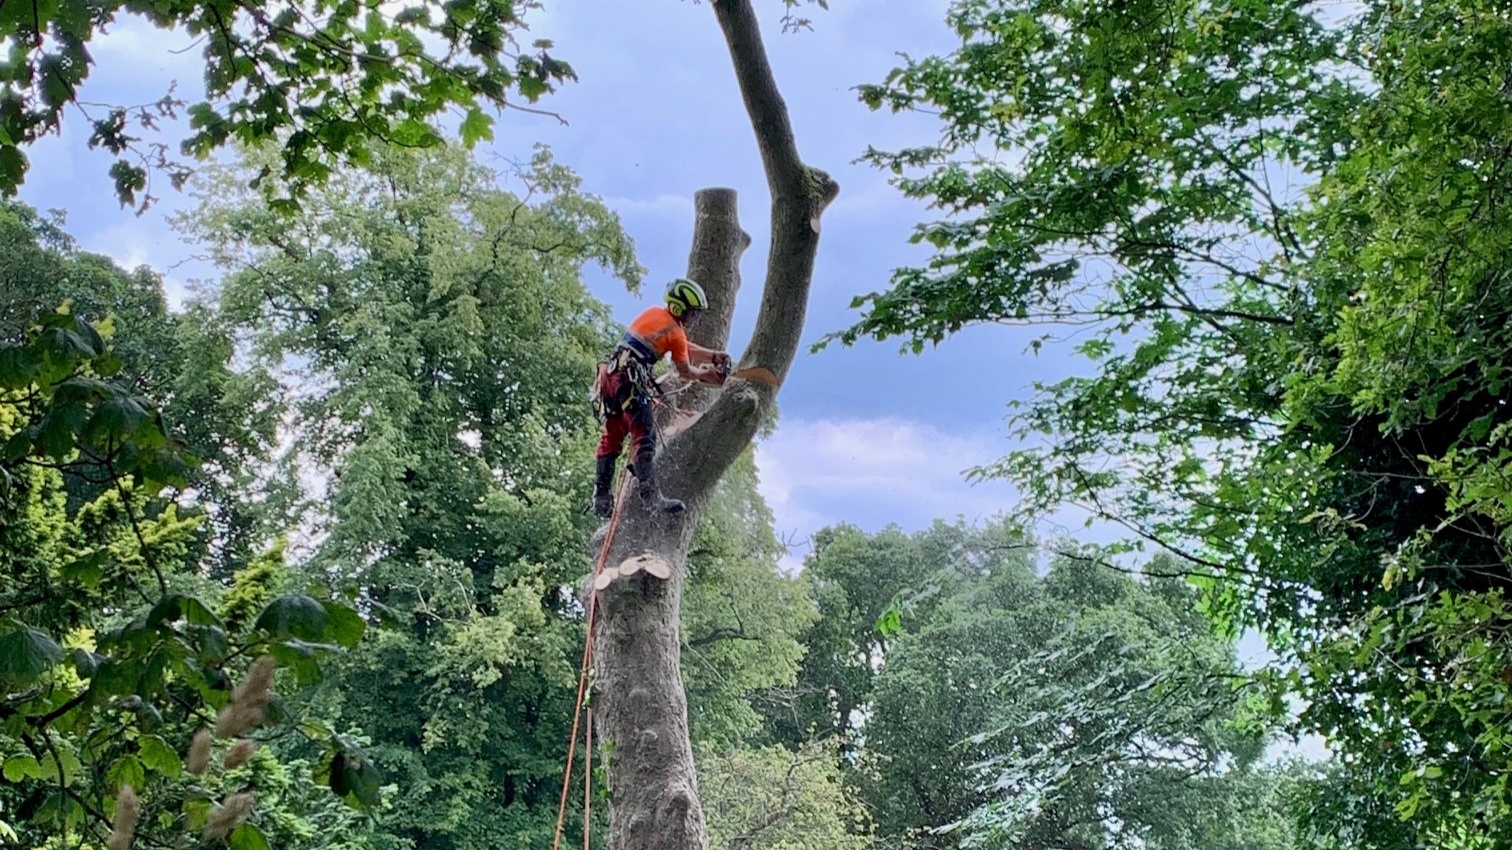 David and Angus, felling a sycamore